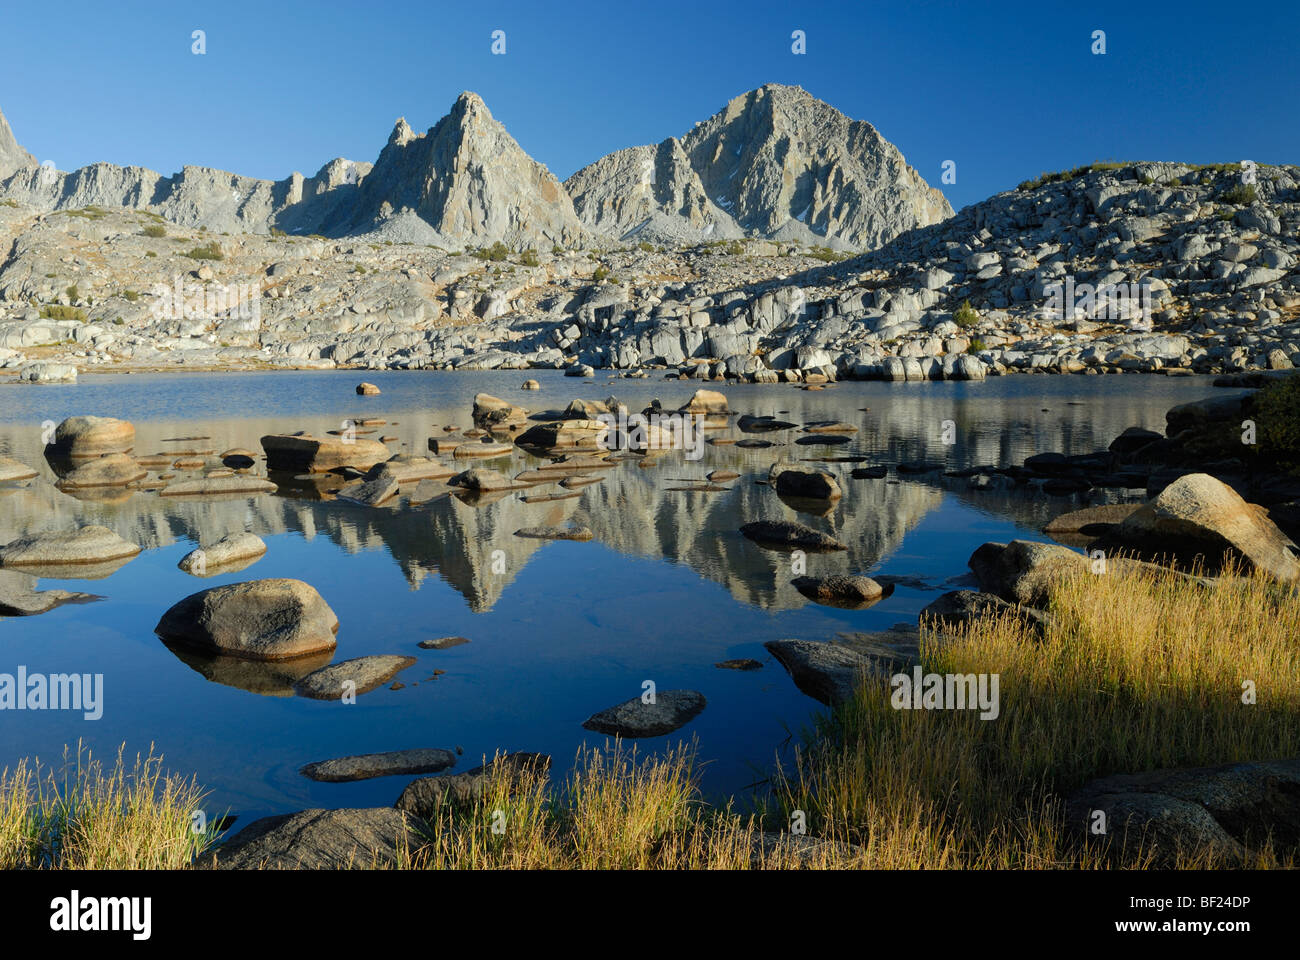 Reflections in a mountain lake in Sierra Nevada, California Stock Photo